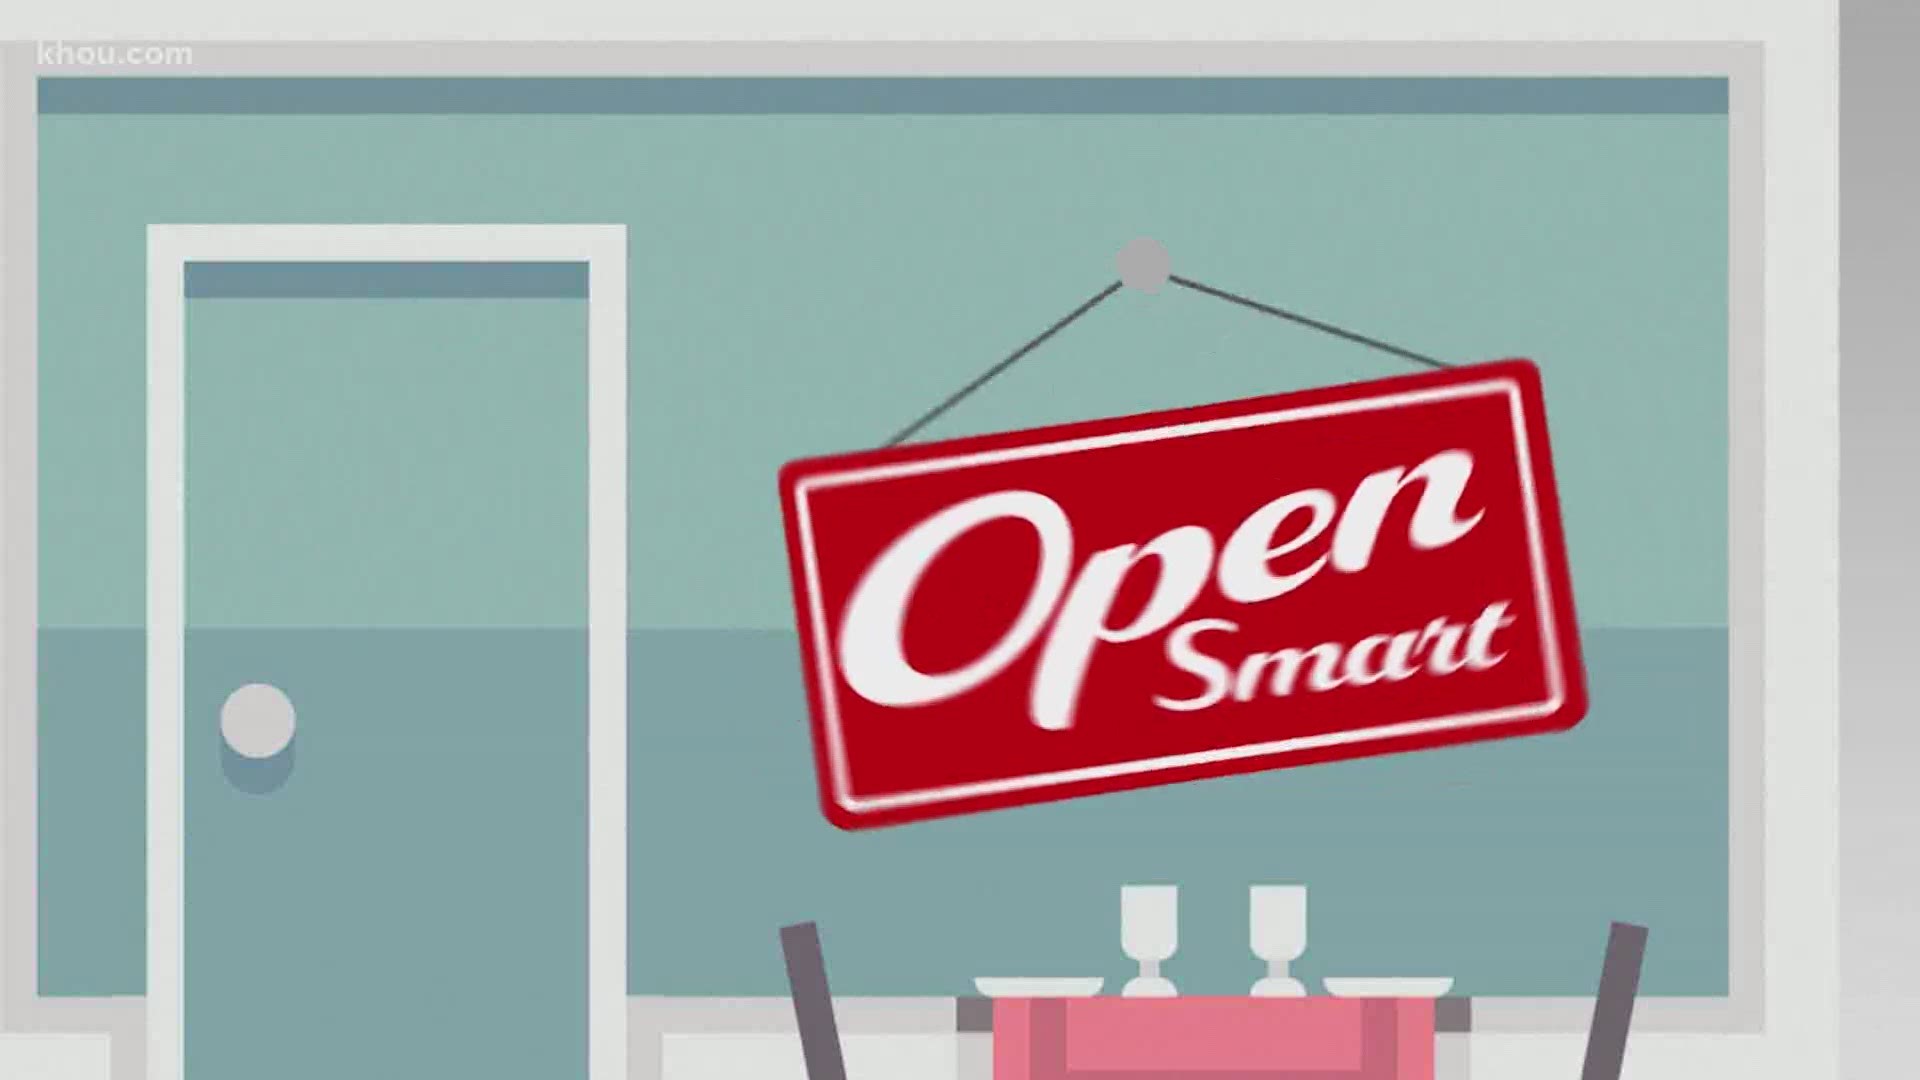 Texas is reopening, starting Friday. We want to know how businesses are opening smart.